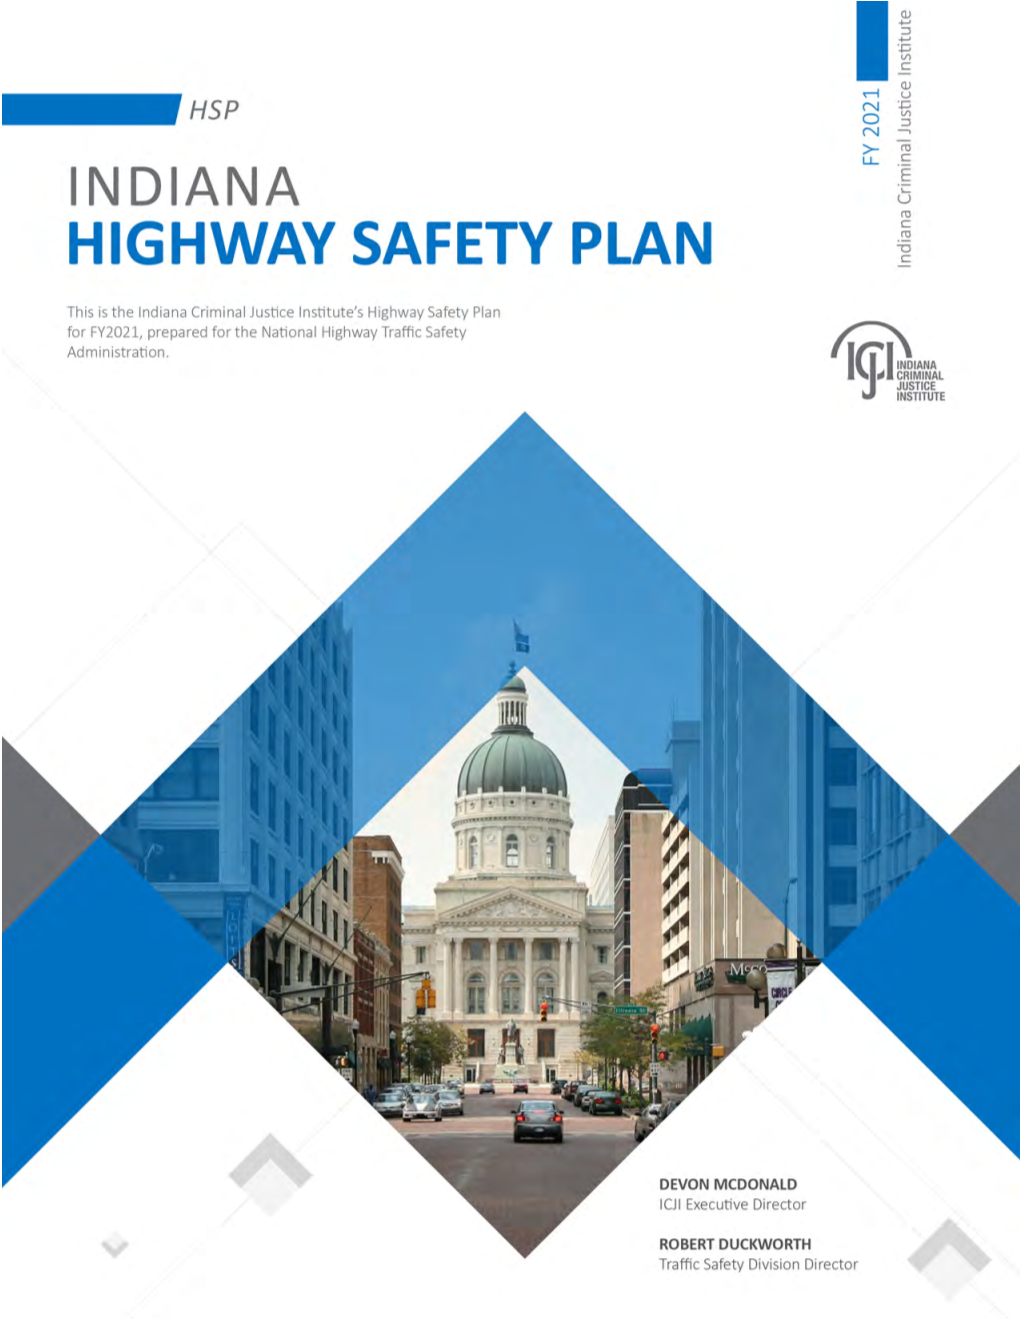 Indiana Highway Safety Plan INDIANA CRIMINAL JUSTICE INSTITUTE